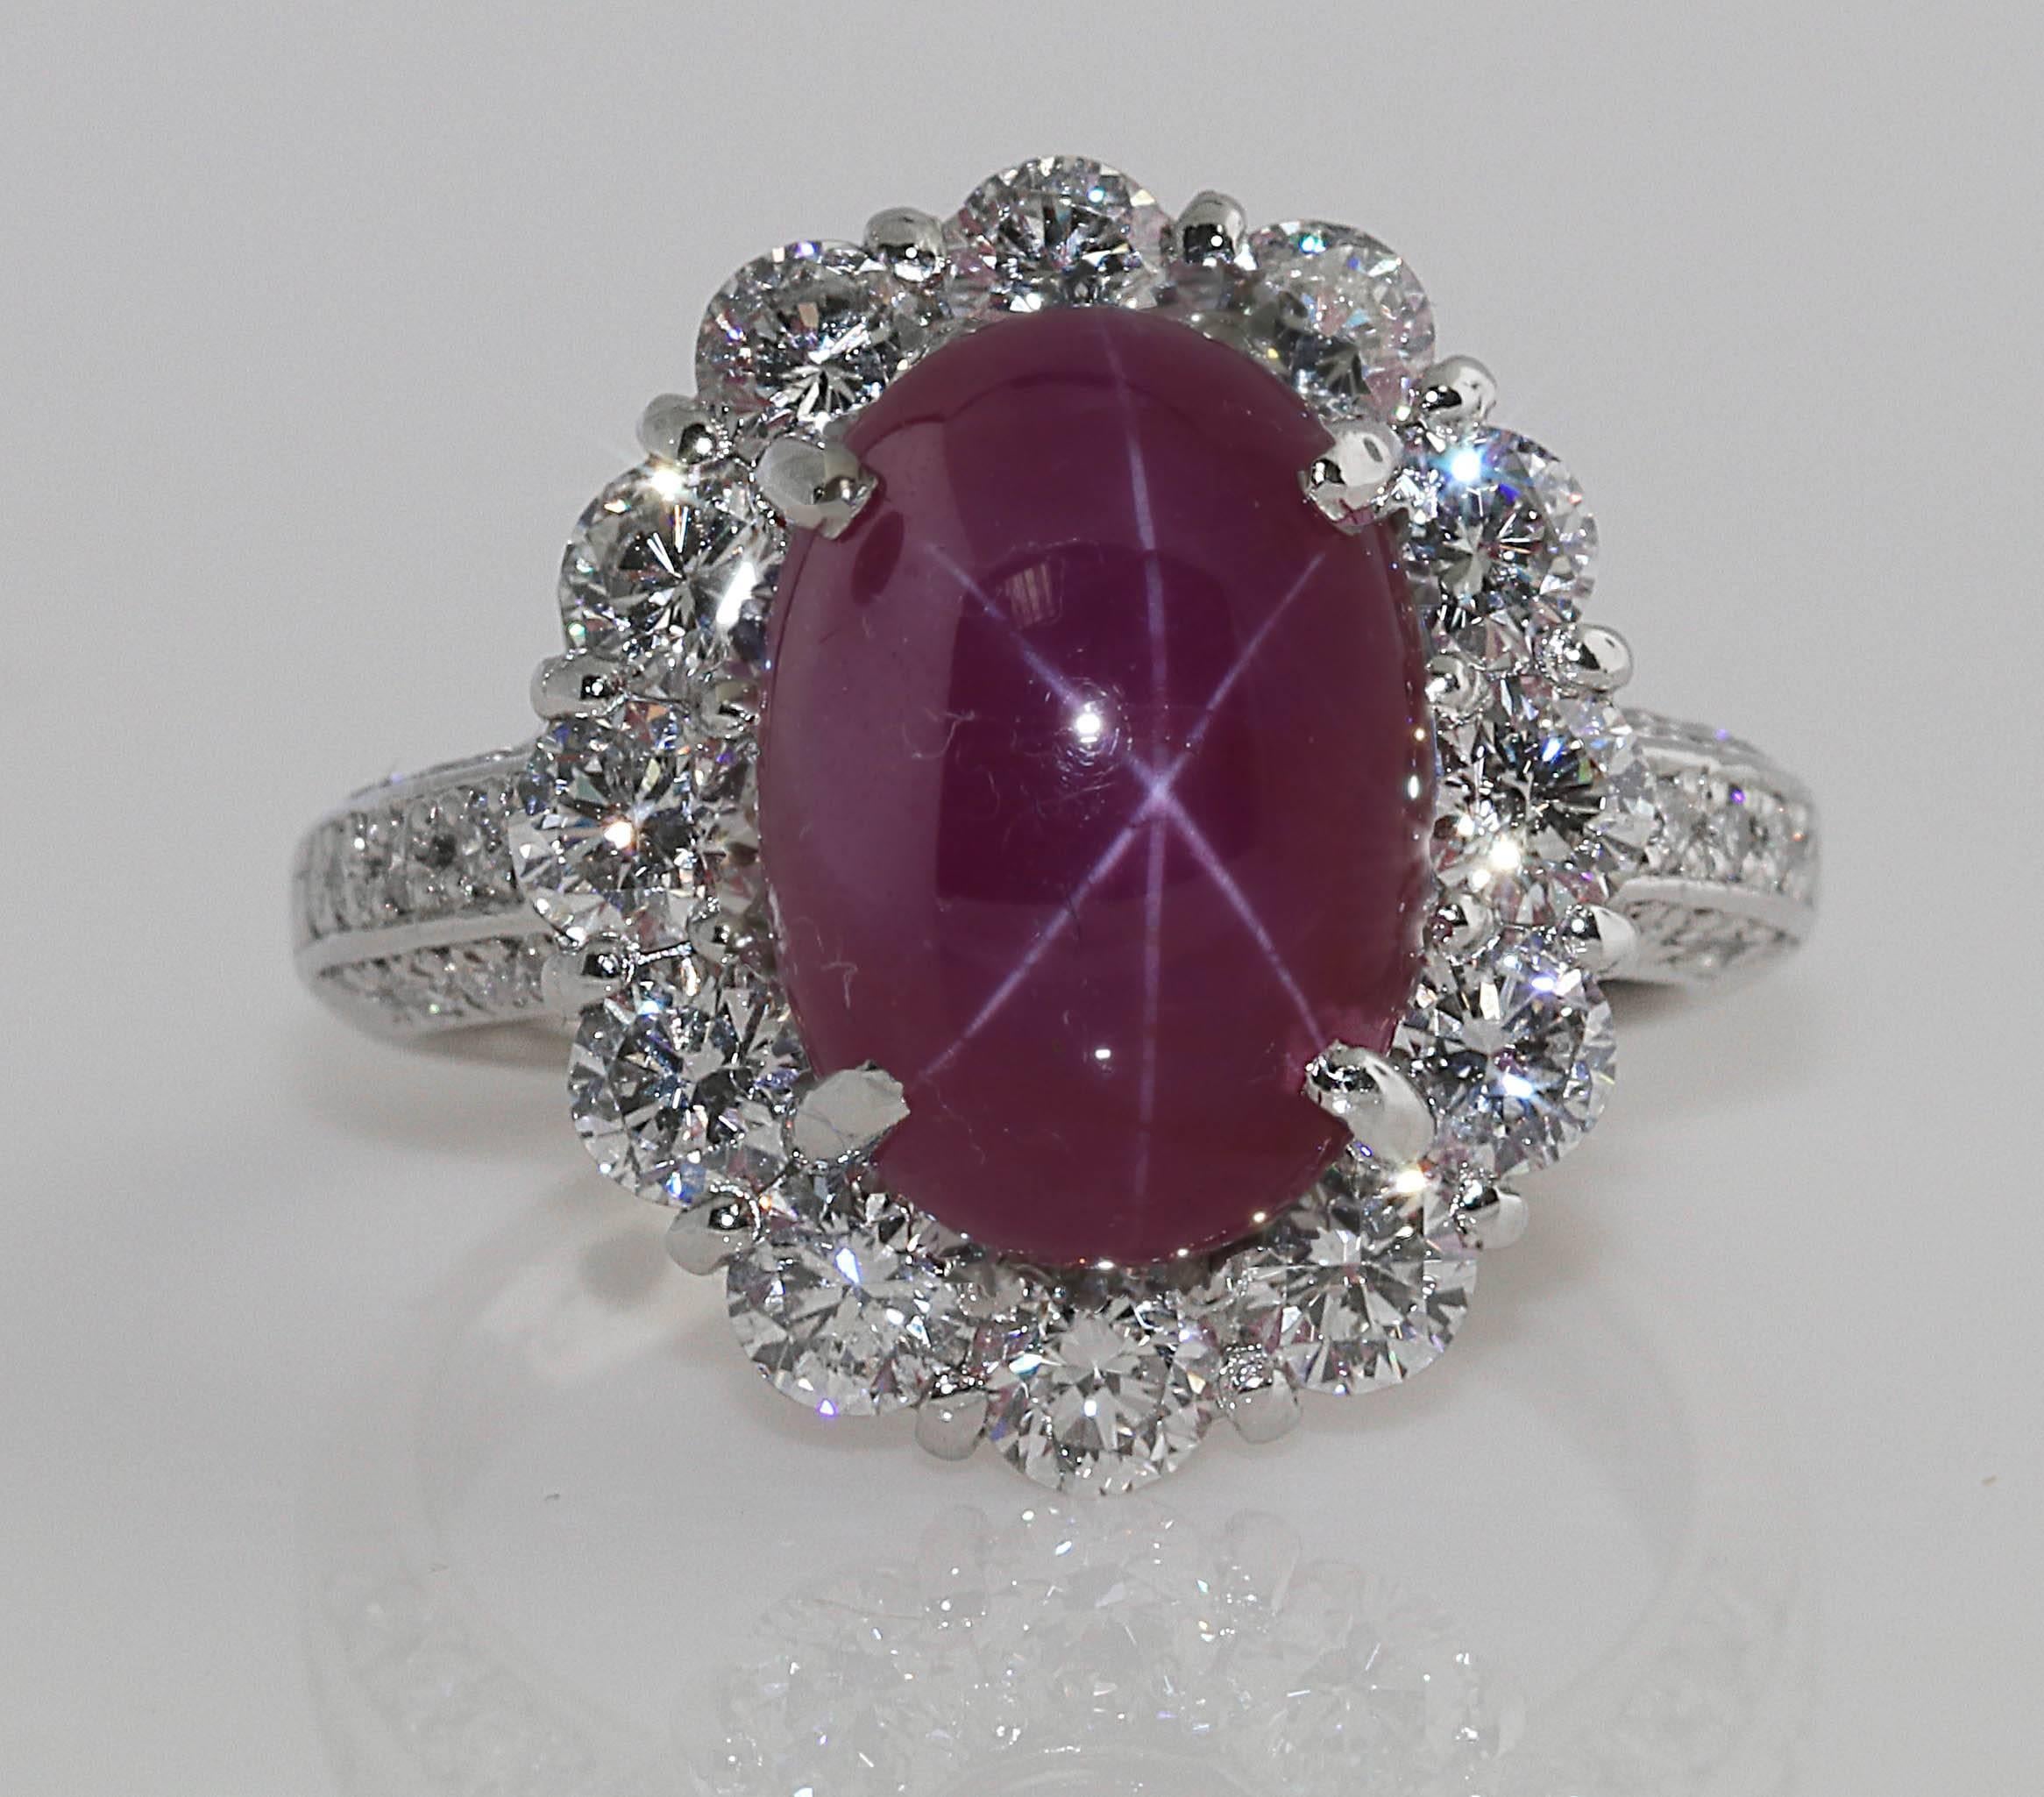 This Burma Star Ruby is the perfect gift for someone looking for an original Cocktail ring. Burma is the best source of rubies in the world and finding star rubies from Burma is extremely rare as well. This ring is currently a size 6, but can be